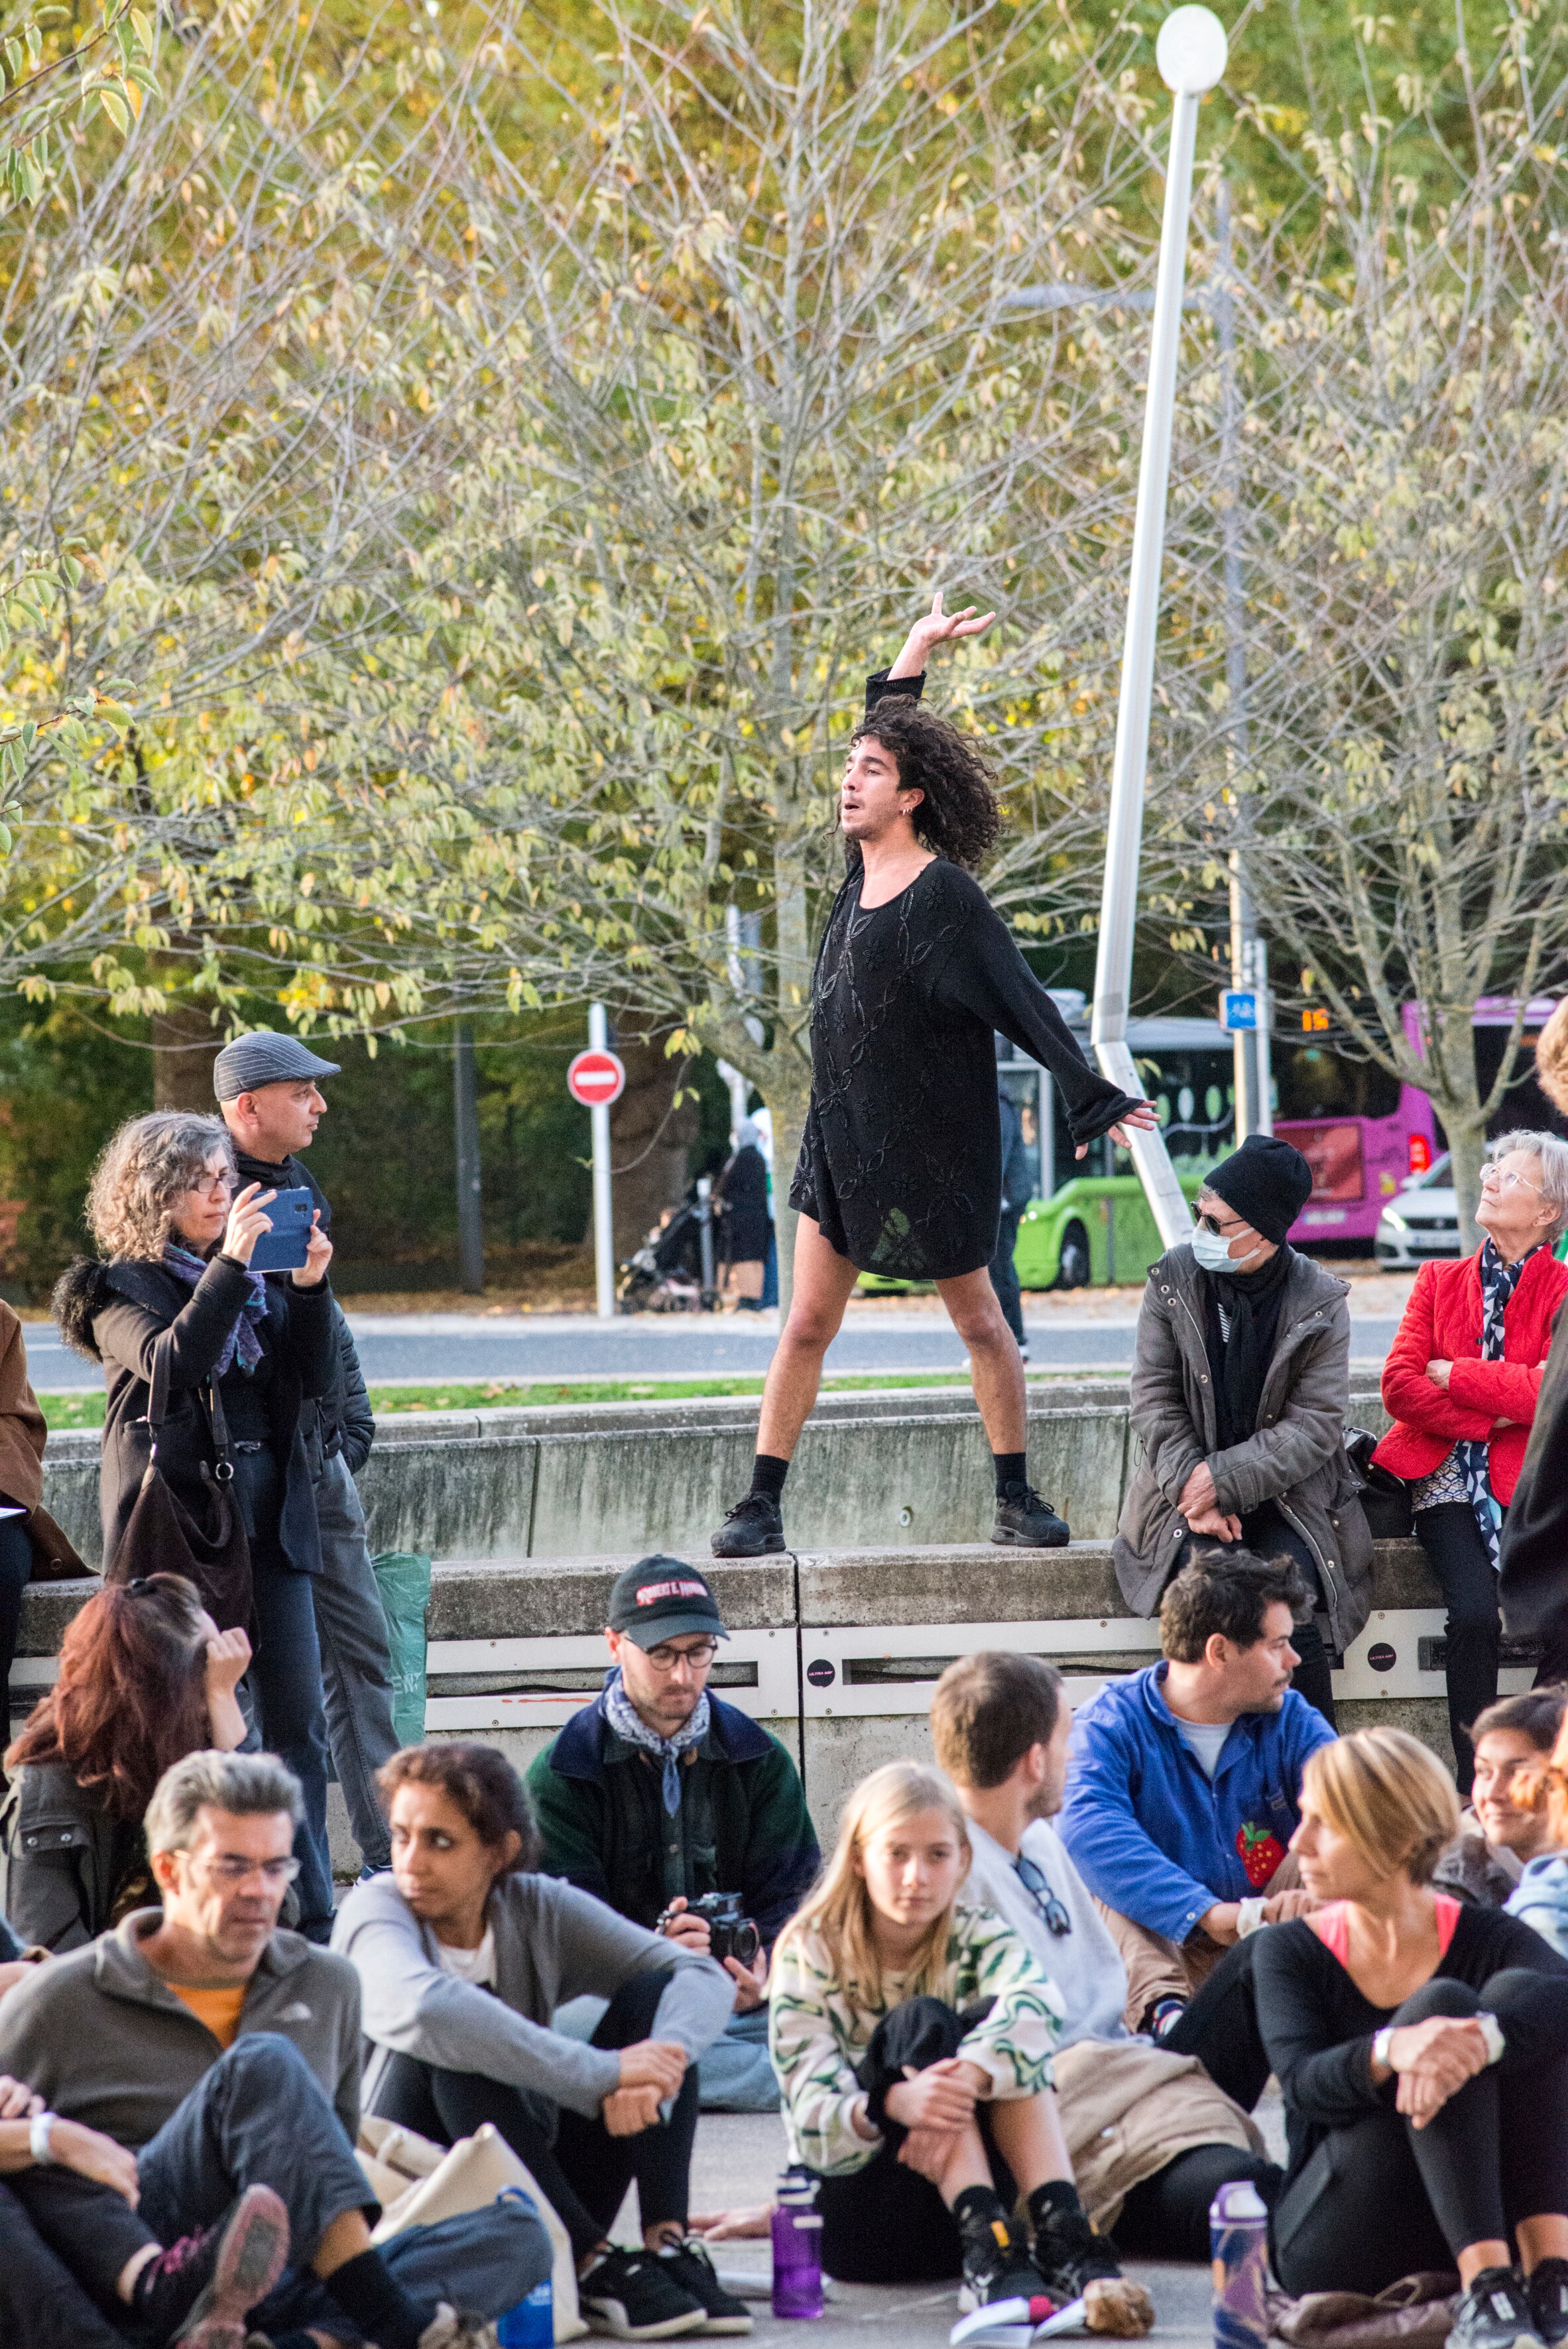 Dancer dressed in a black tunic standing on a concrete wall in the middle of the audience, who are sitting cross-legged